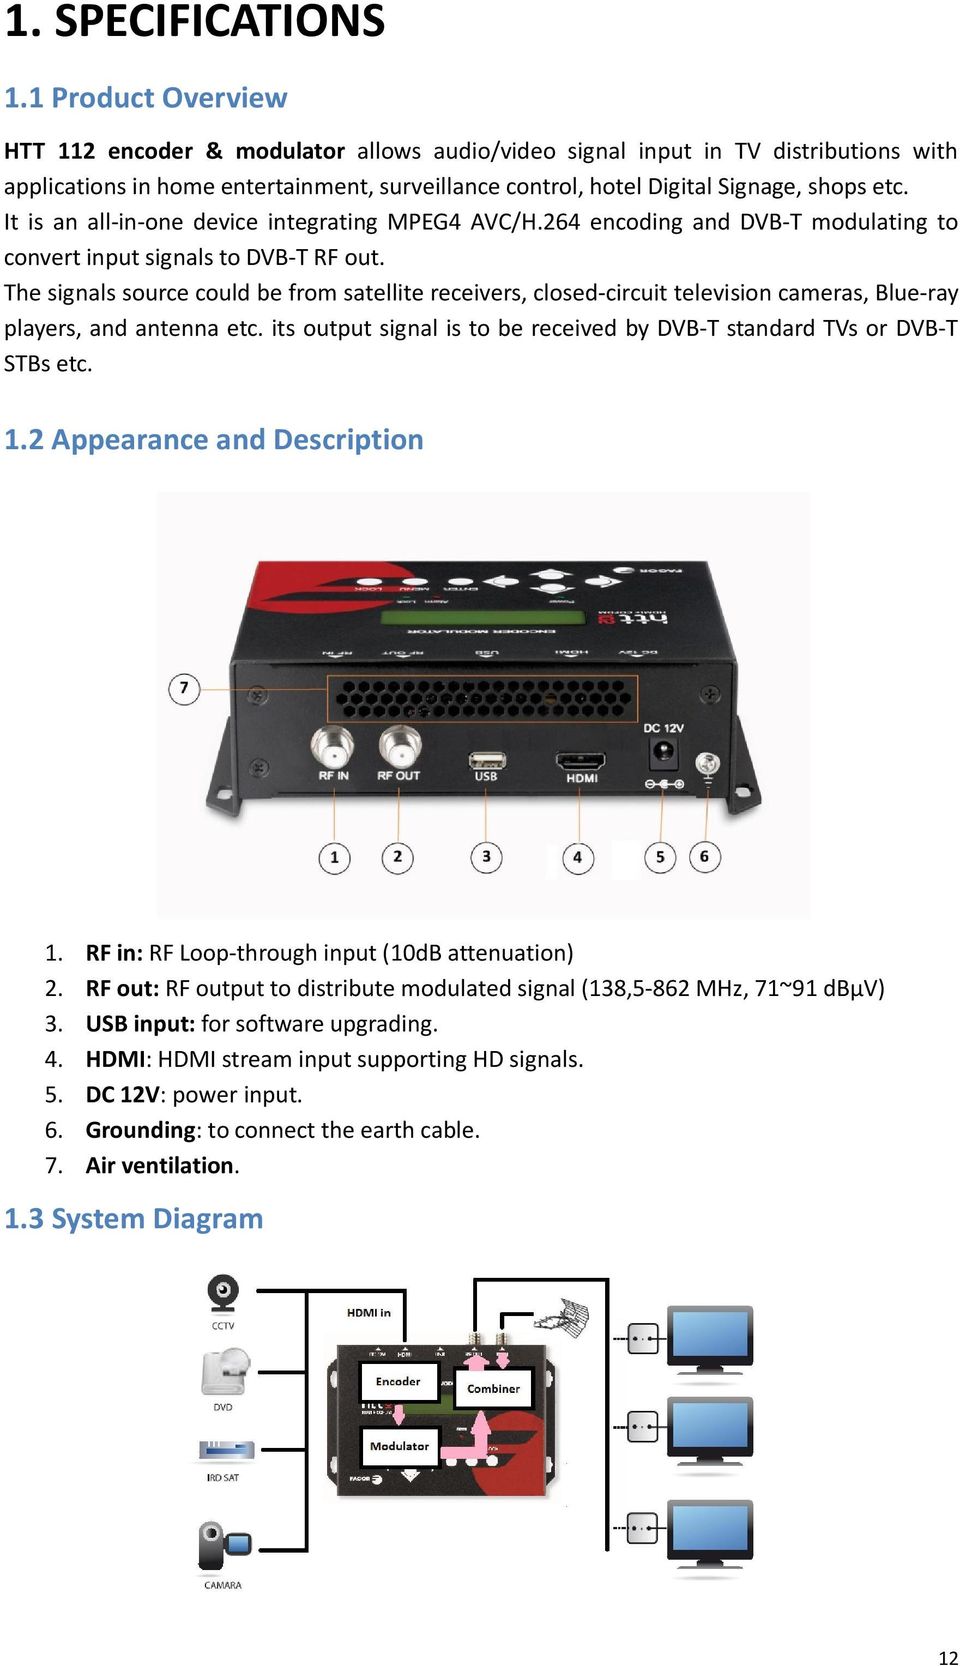 It is an all-in-one device integrating MPEG4 AVC/H.264 encoding and DVB-T modulating to convert input signals to DVB-T RF out.